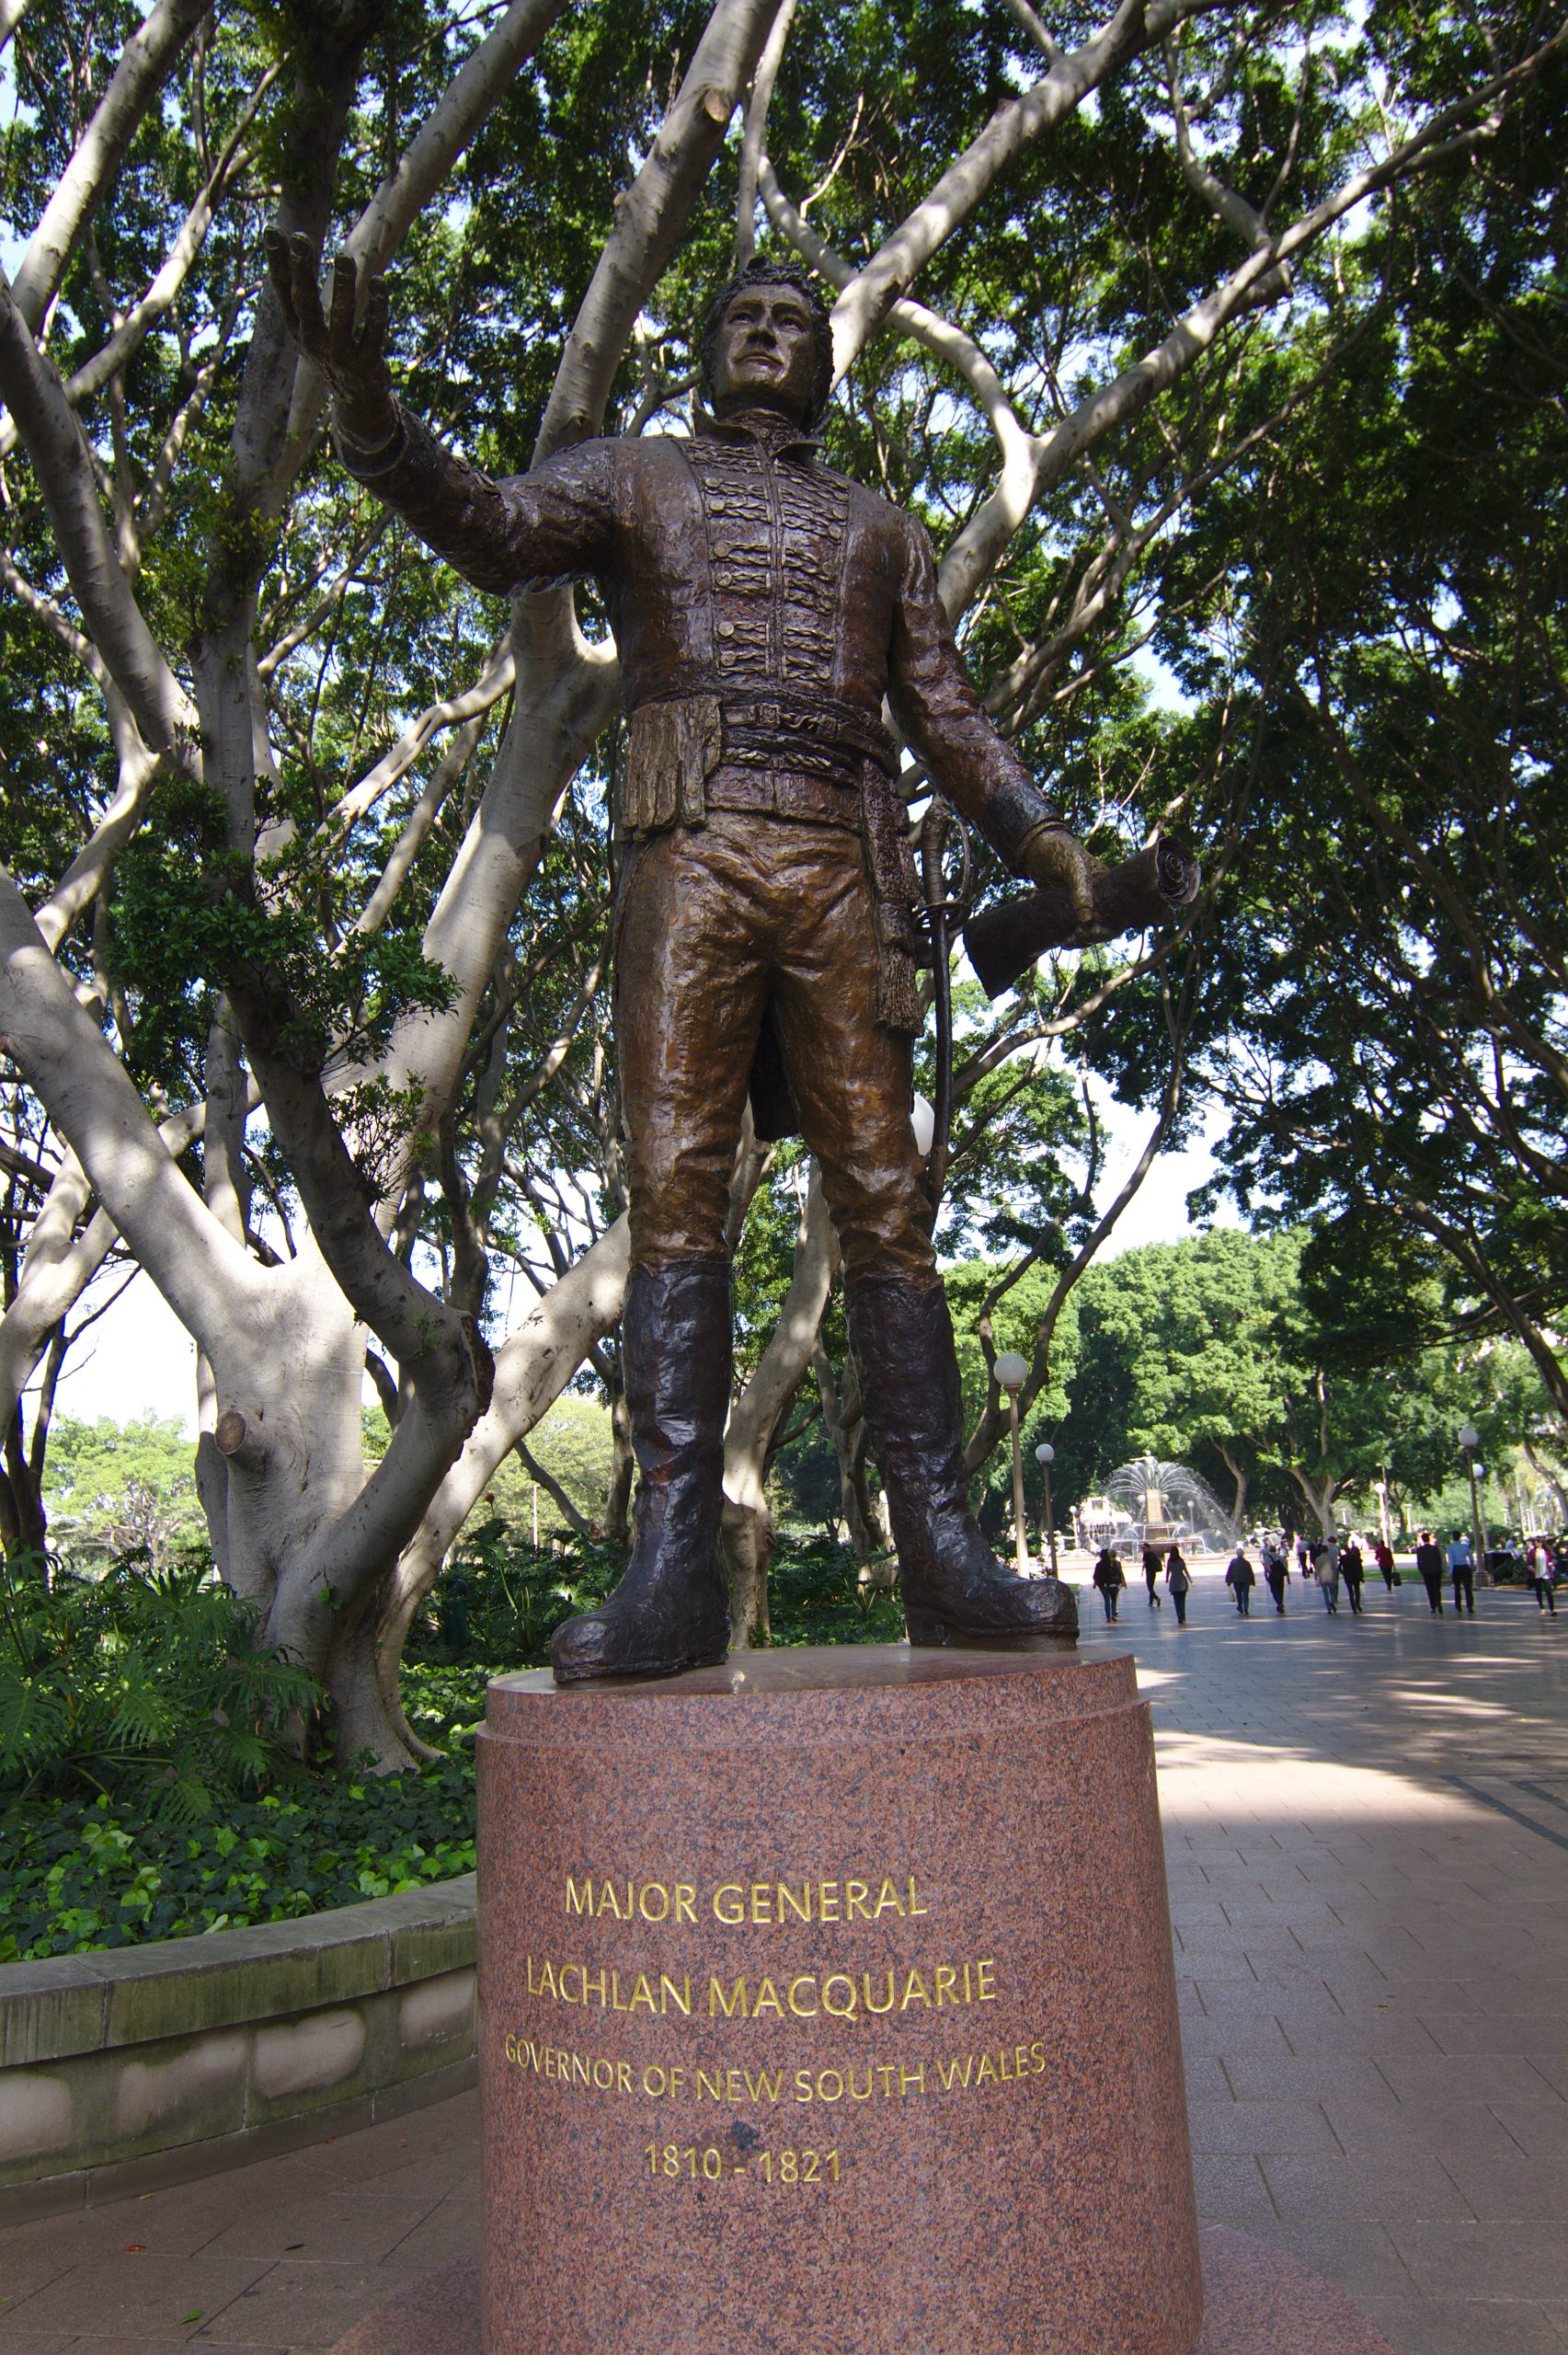 Bronze statue of a man with the plaque Major General Lachlan Macquarie